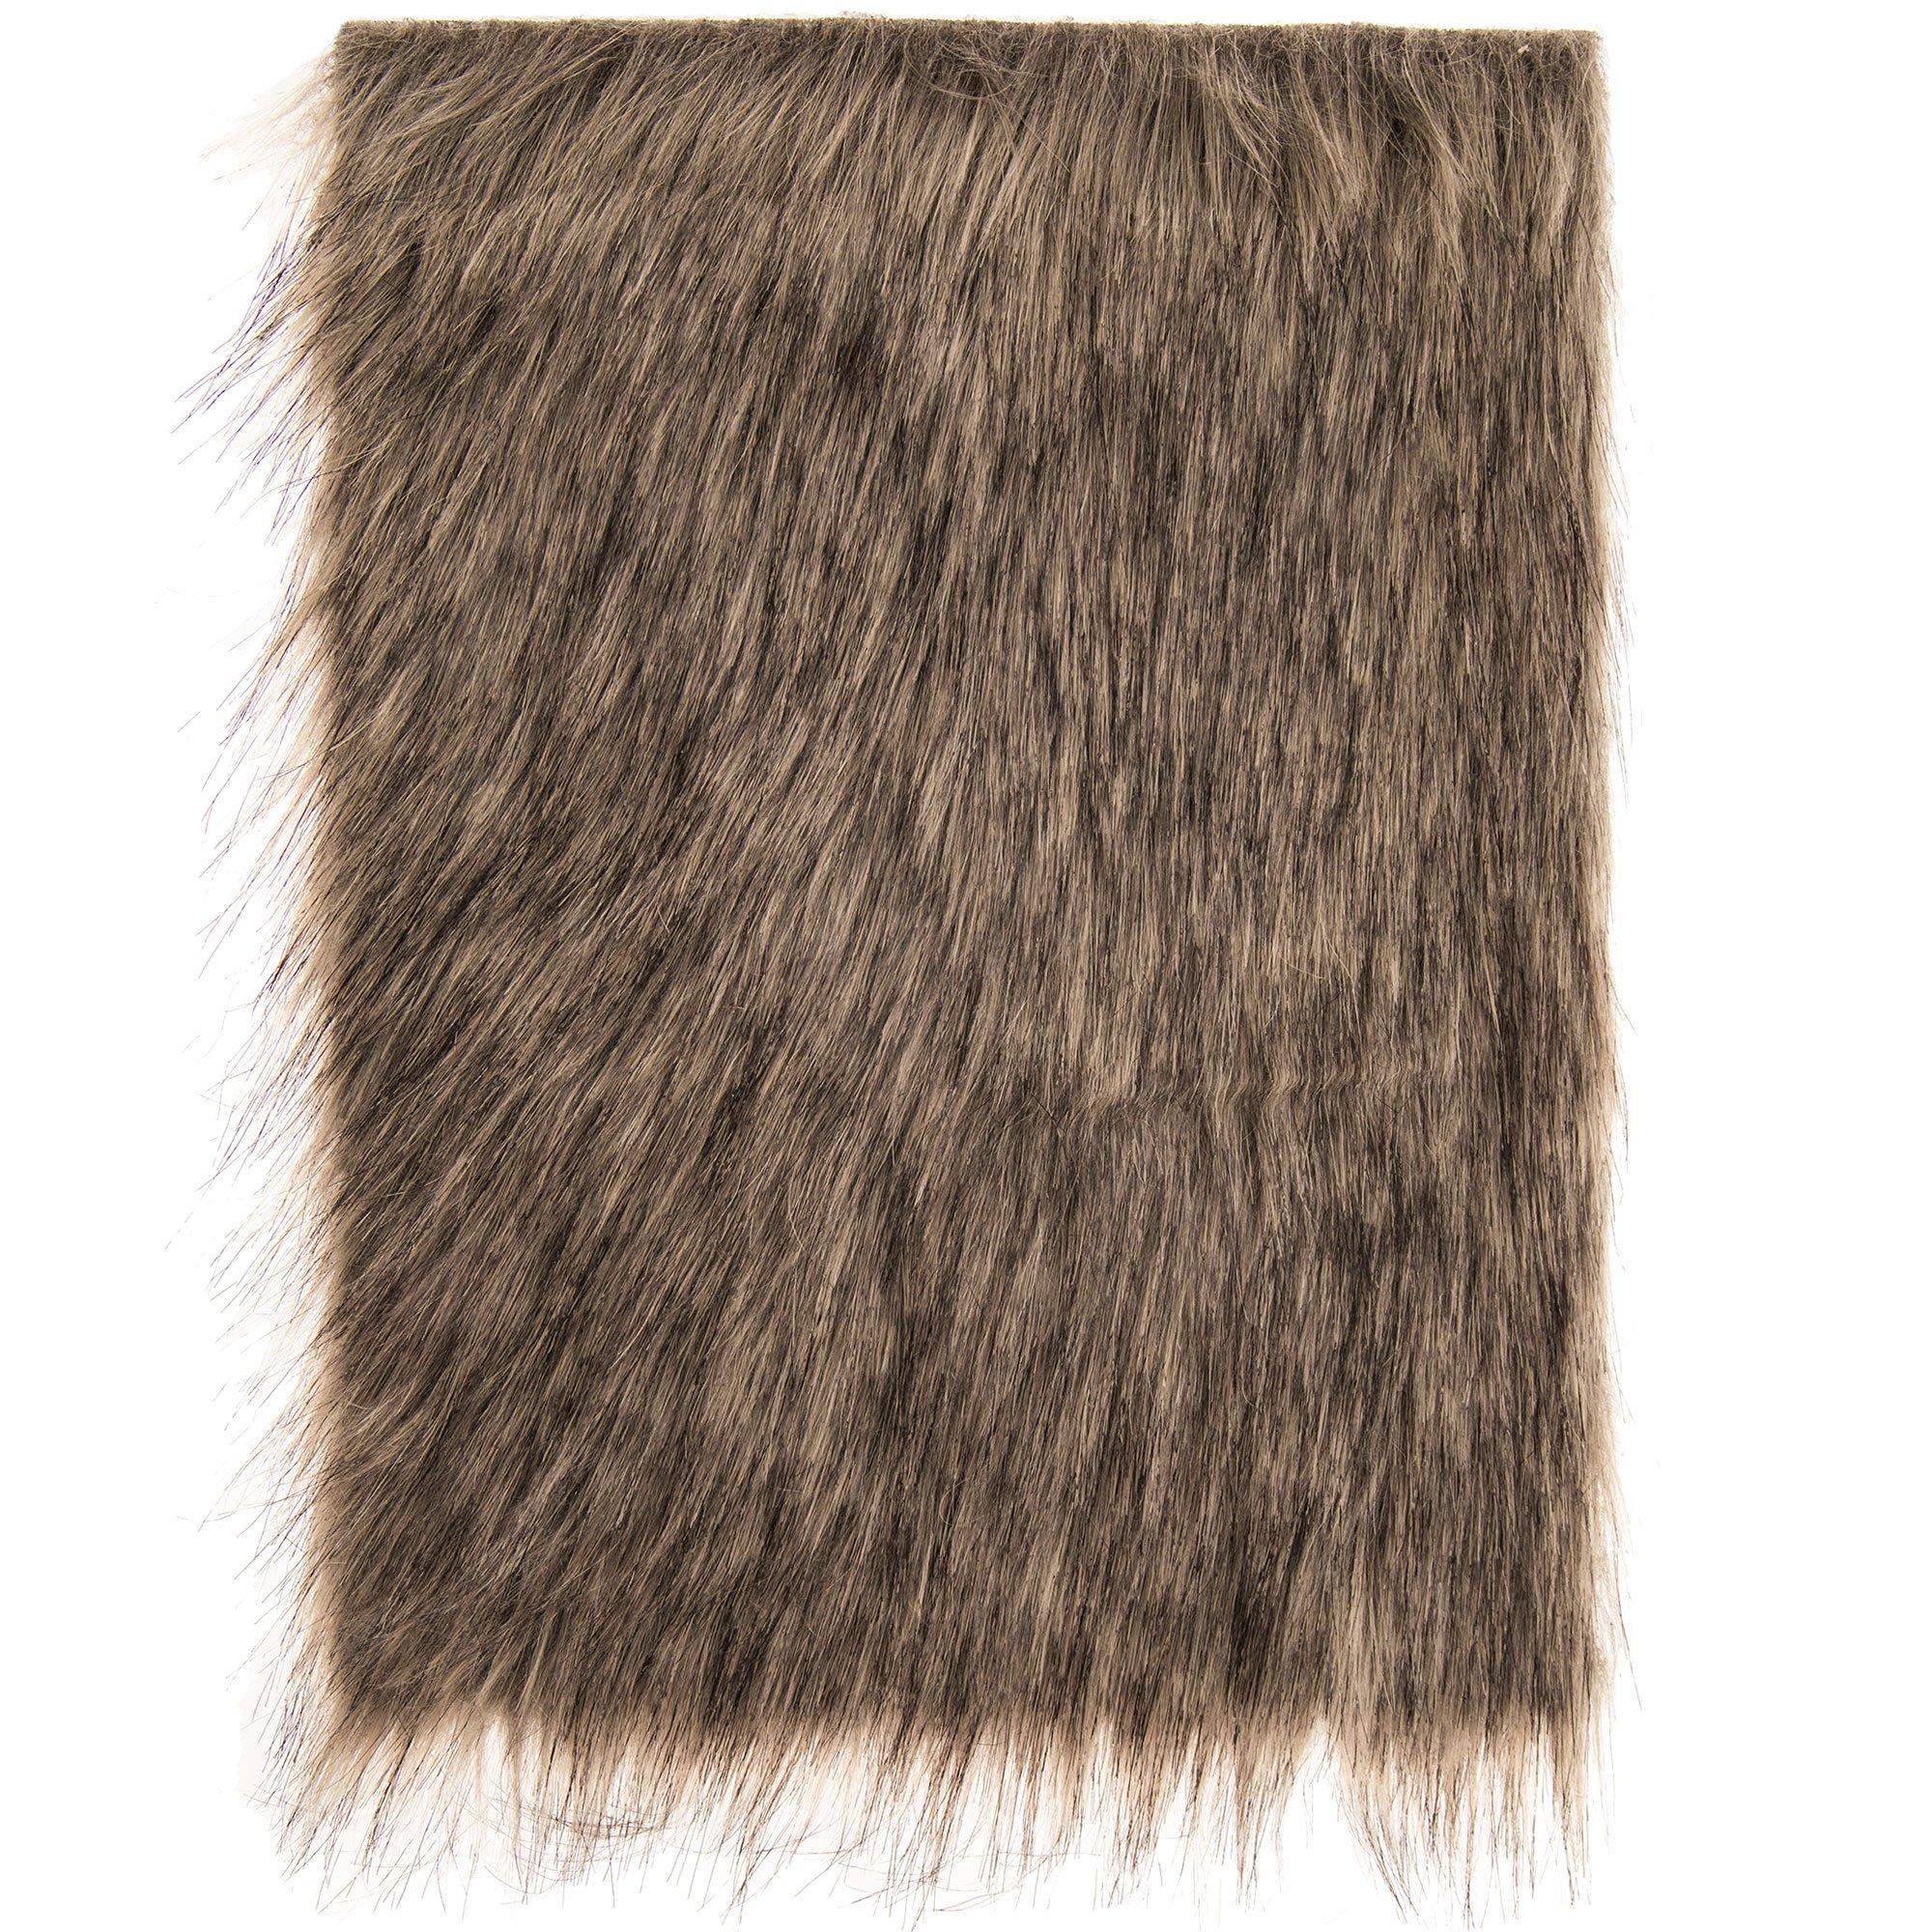 Brown Faux Fur Craft Fabric